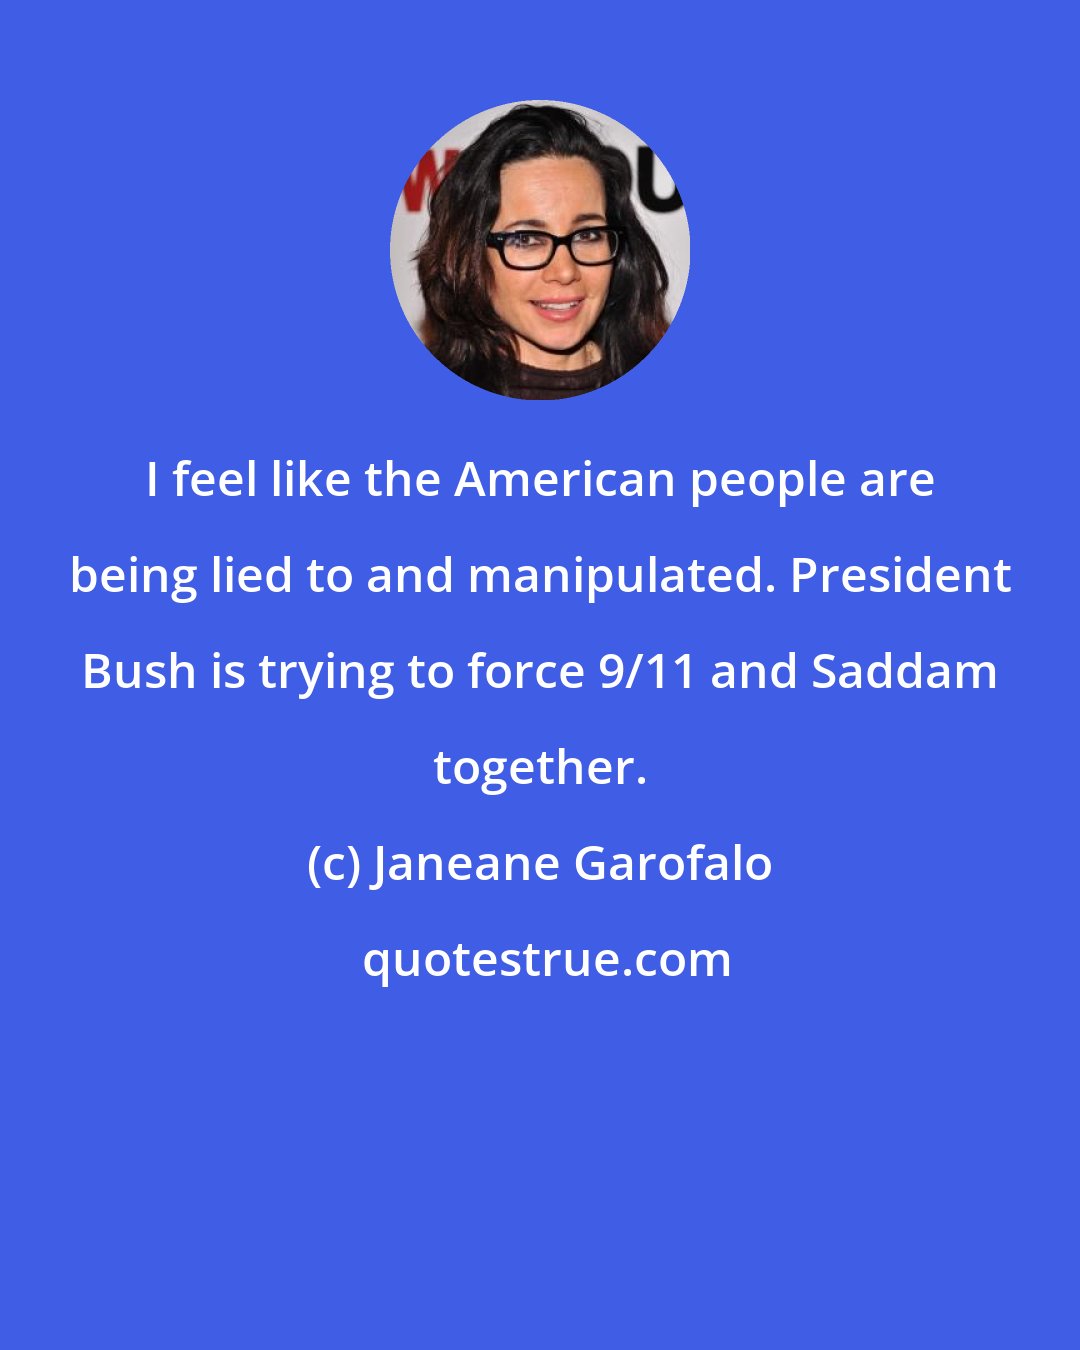 Janeane Garofalo: I feel like the American people are being lied to and manipulated. President Bush is trying to force 9/11 and Saddam together.